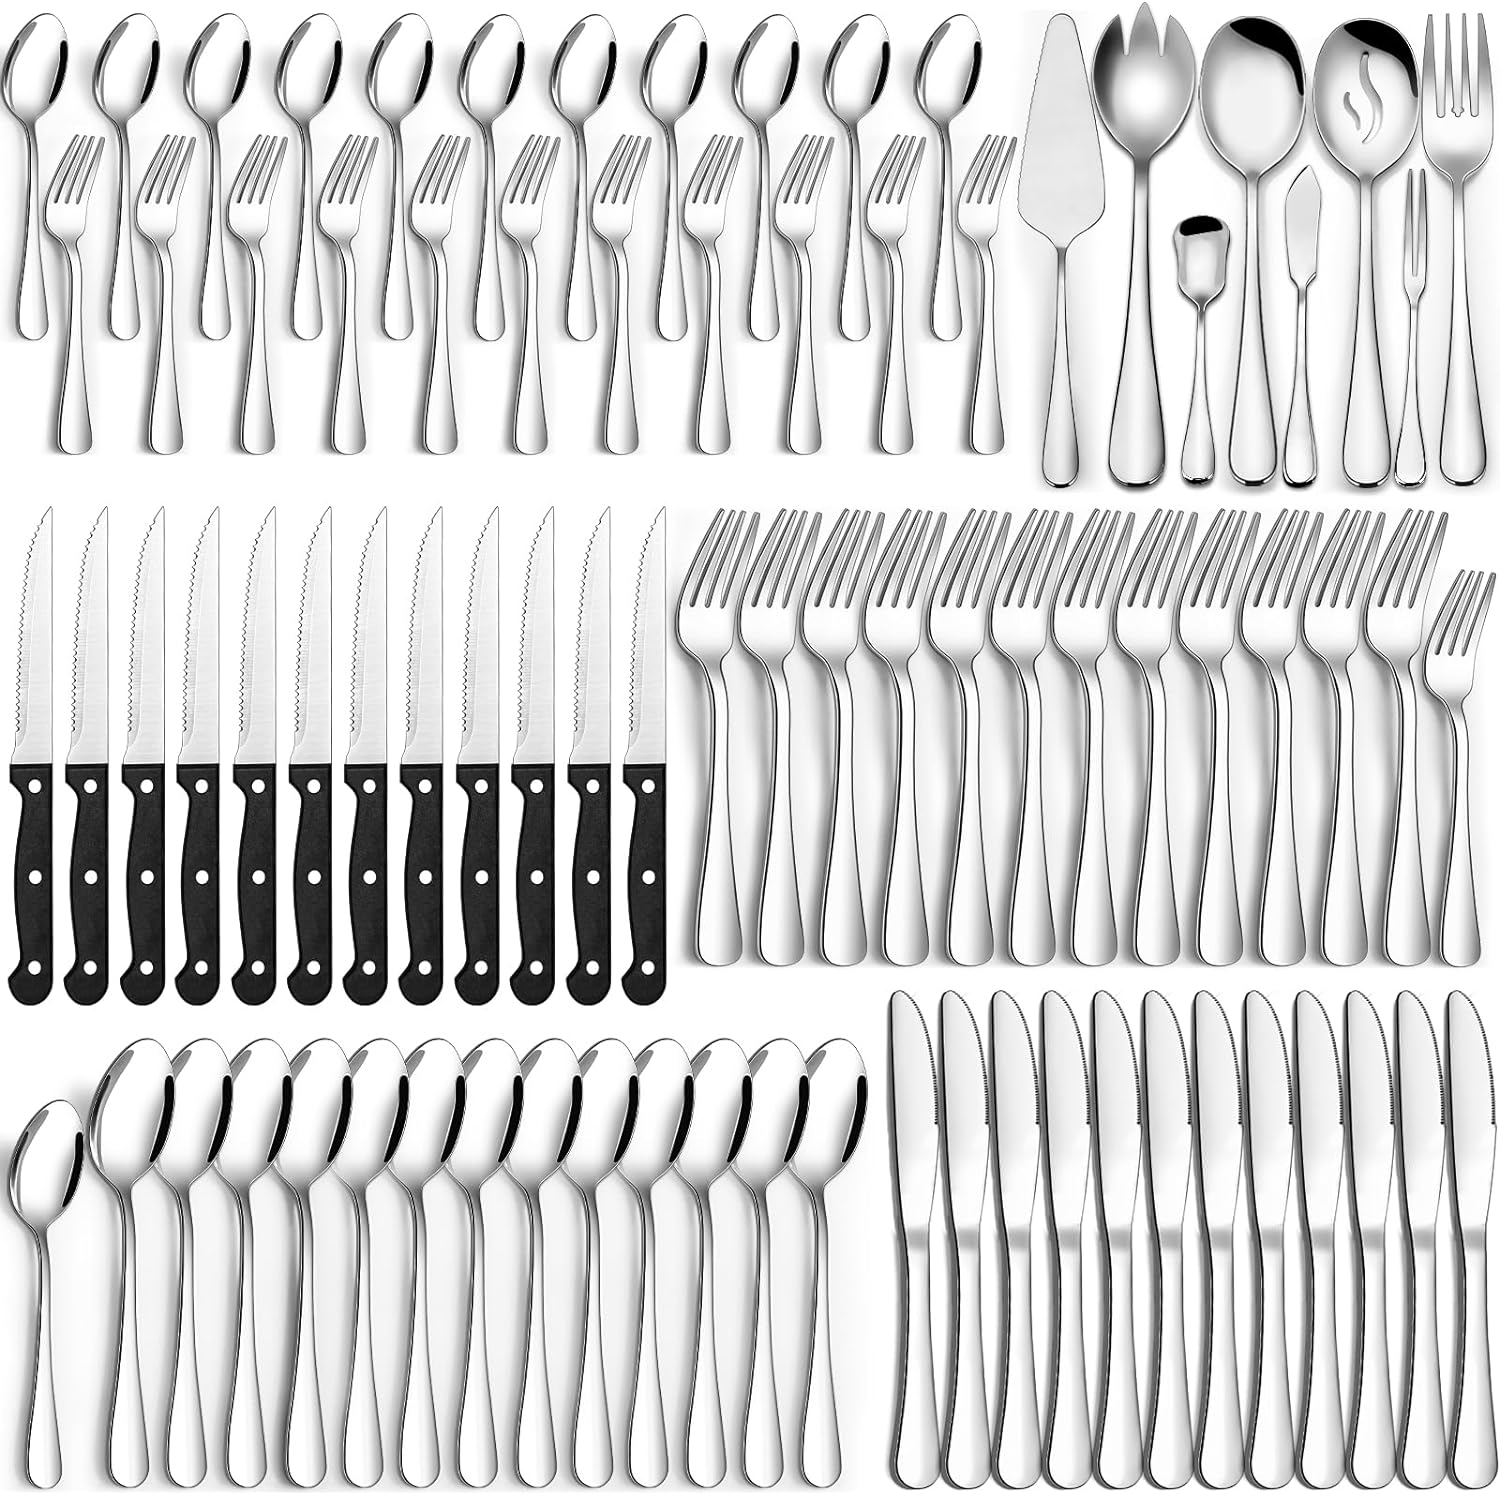 80 Pieces Silverware Set with Serving Utensils Set, CEKEE Stainless Steel Flatware Set for 12 with Steak Knives, Heavy Duty Cutlery Set, Kitchen Utensil Sets for Home Restaurant, Dishwasher Safe